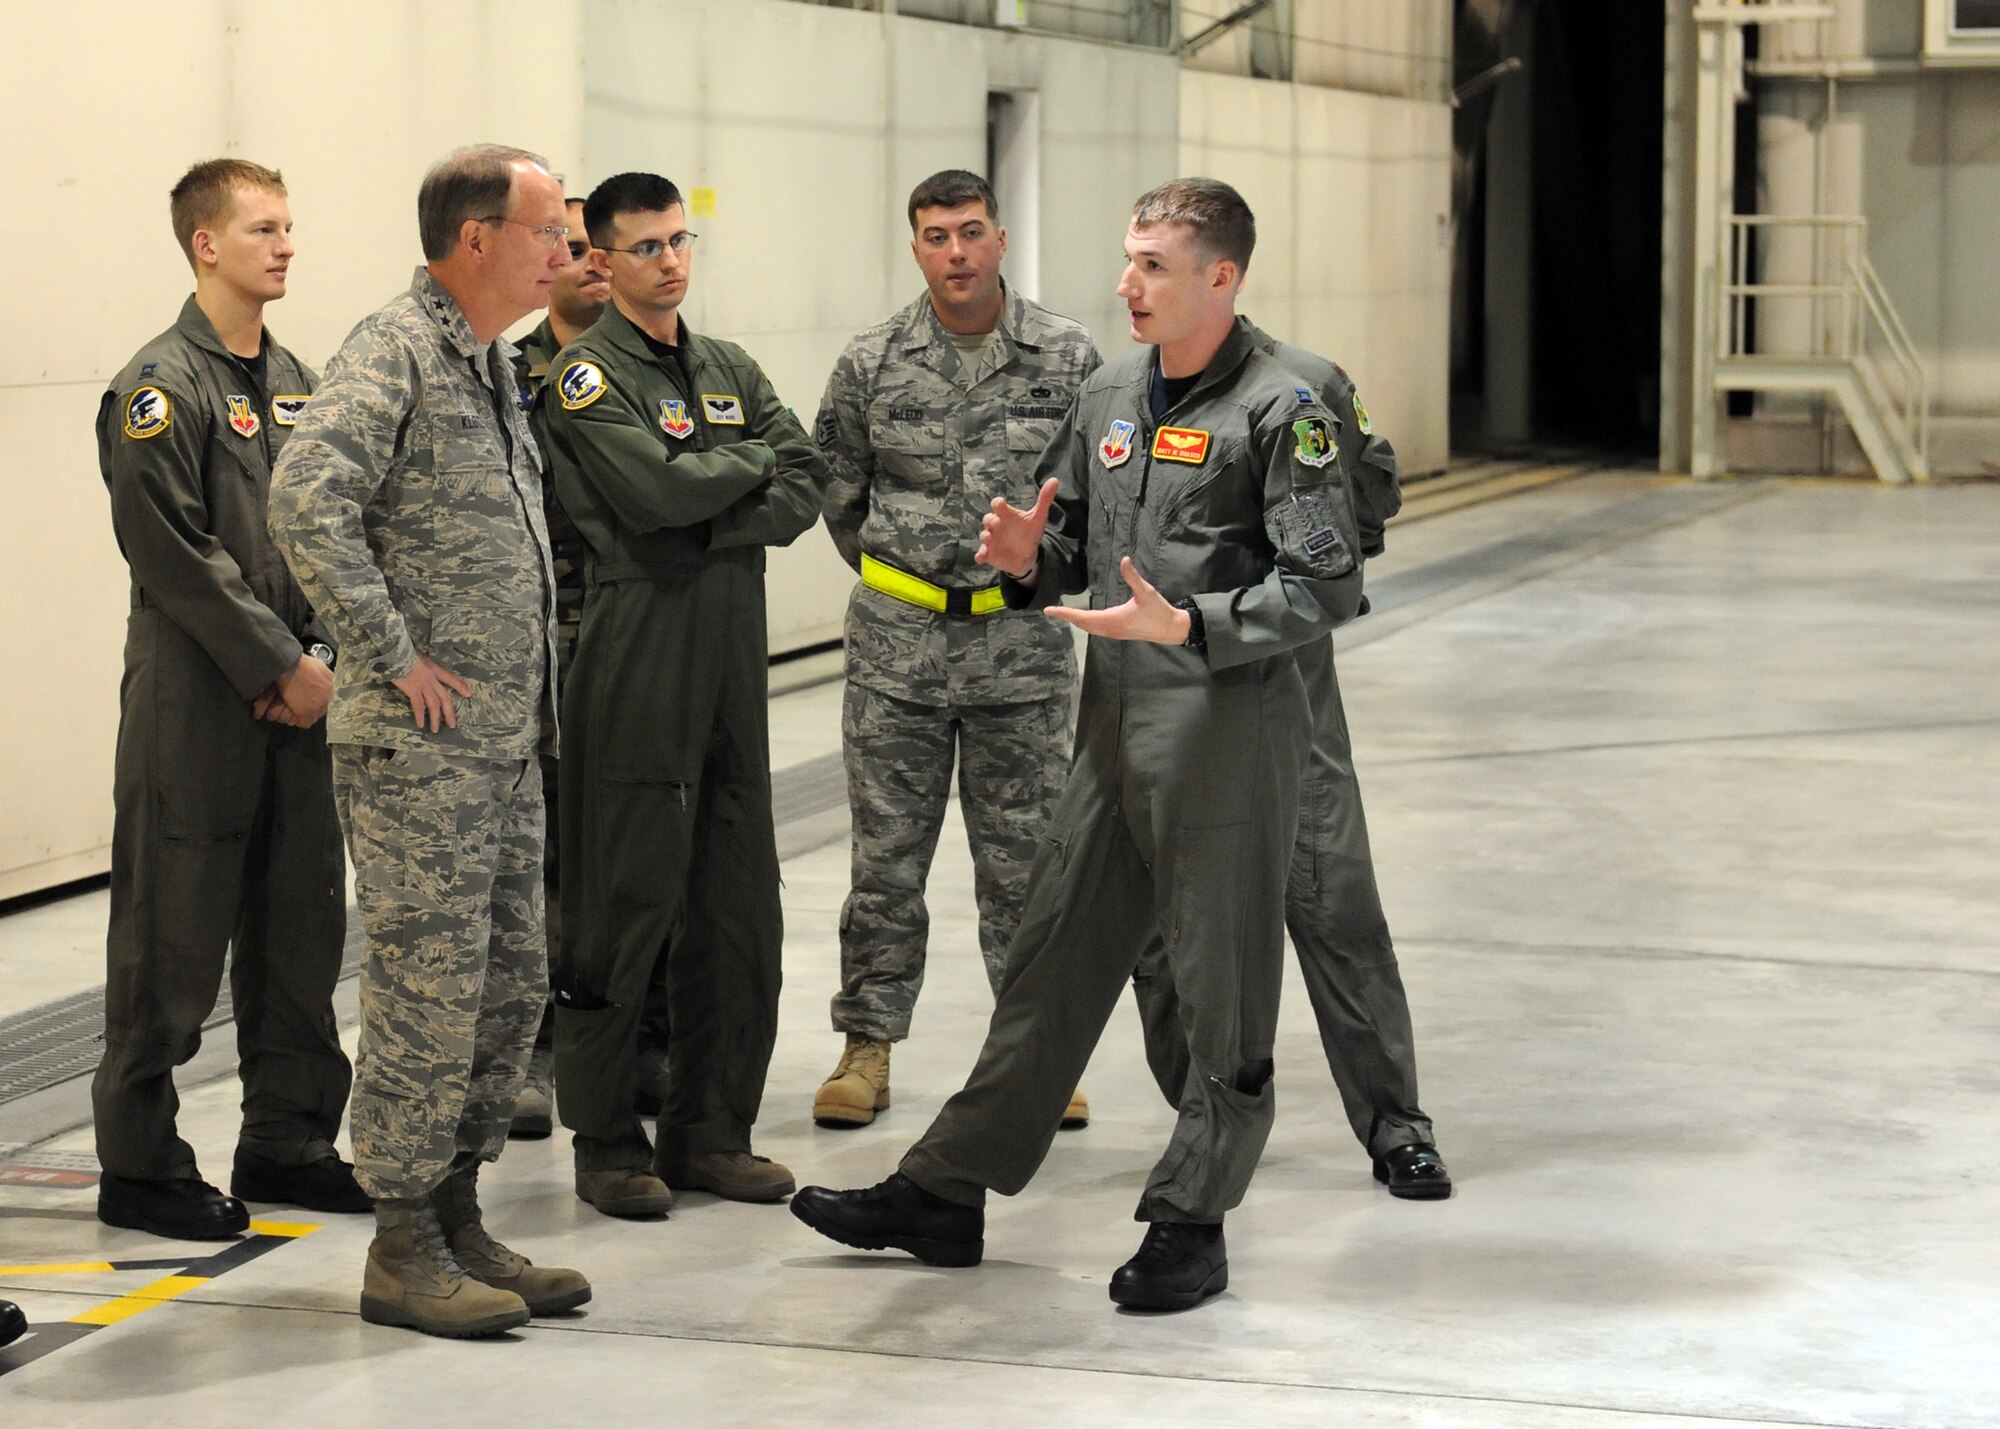 MINOT AIR FORCE BASE, N.D. -- Lt. Gen. Frank G. Klotz, Global Strike Command commander, discusses the capabilities of a B-52H Stratofortress with Maj. Andy Carter, 23rd Bomb Squadron radar navigator, while others look on here, Oct. 28. The general is here to meet members of Minot AFB and the local community. He is scheduled to be the featured speaker at the Minot Chamber of Commerce annual meeting and luncheon in Minot Oct. 29. (U.S. Air Force photo by Staff Sgt. Keith Ballard)